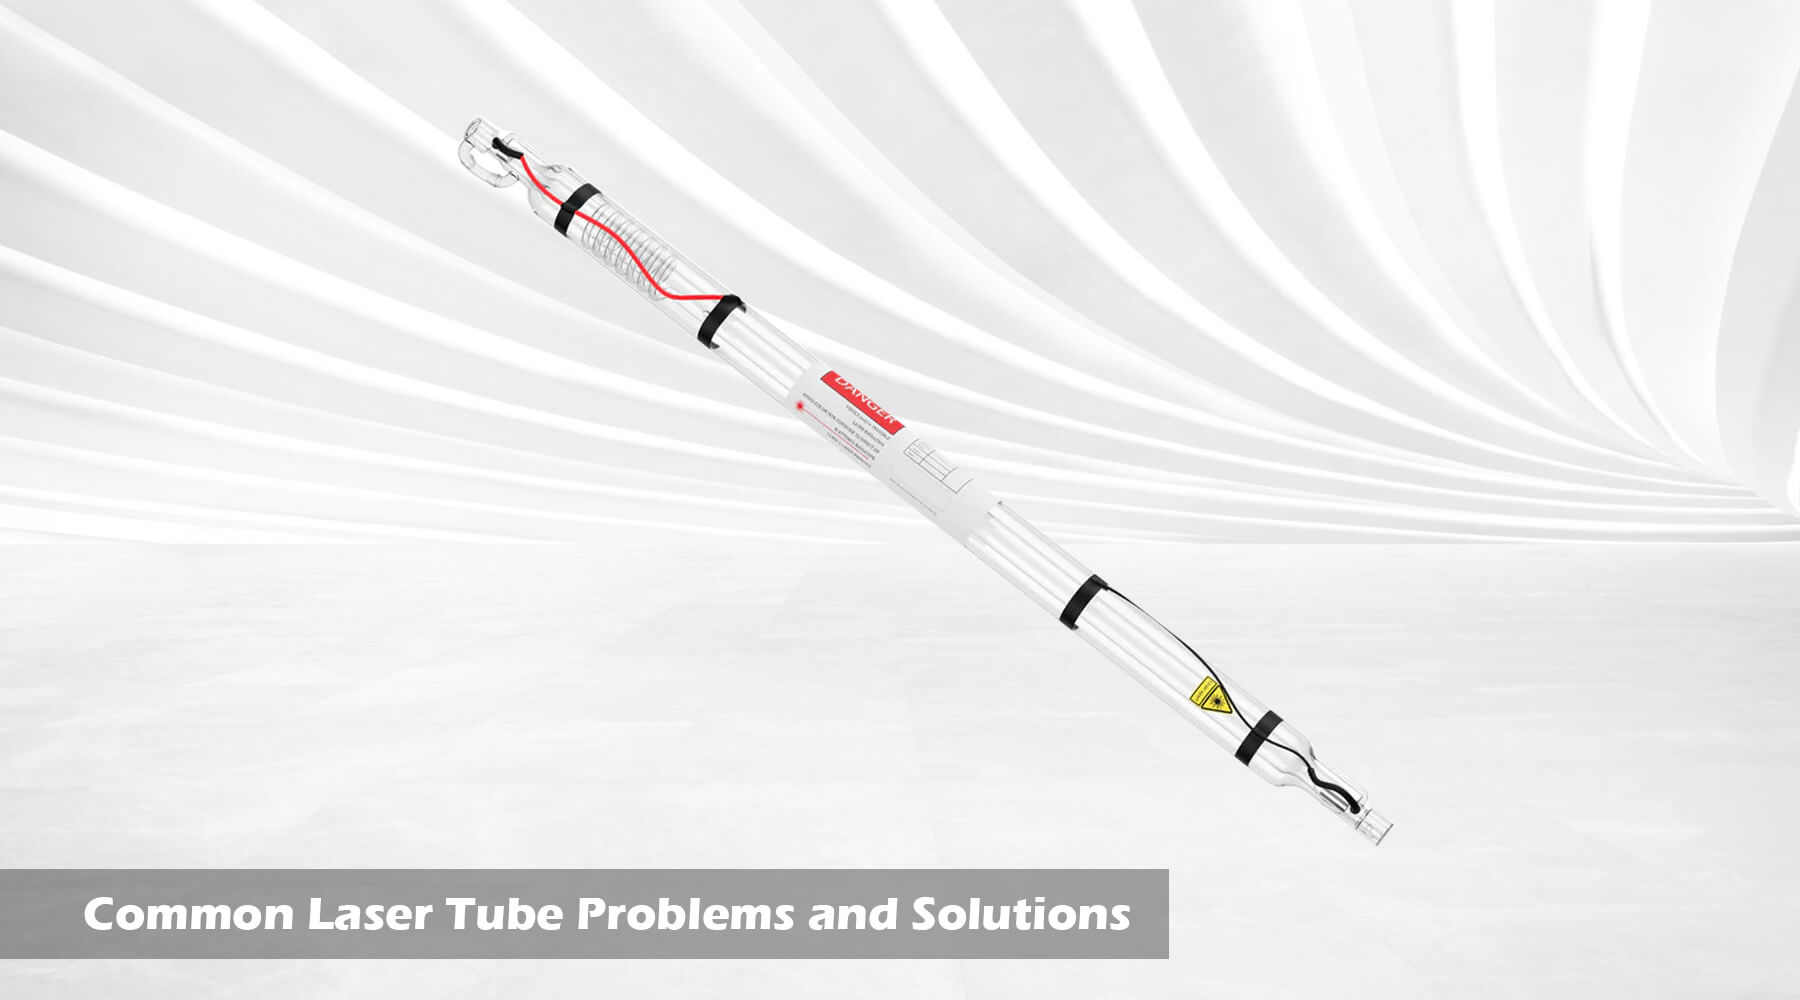 Common Laser Tube Problems and Solutions